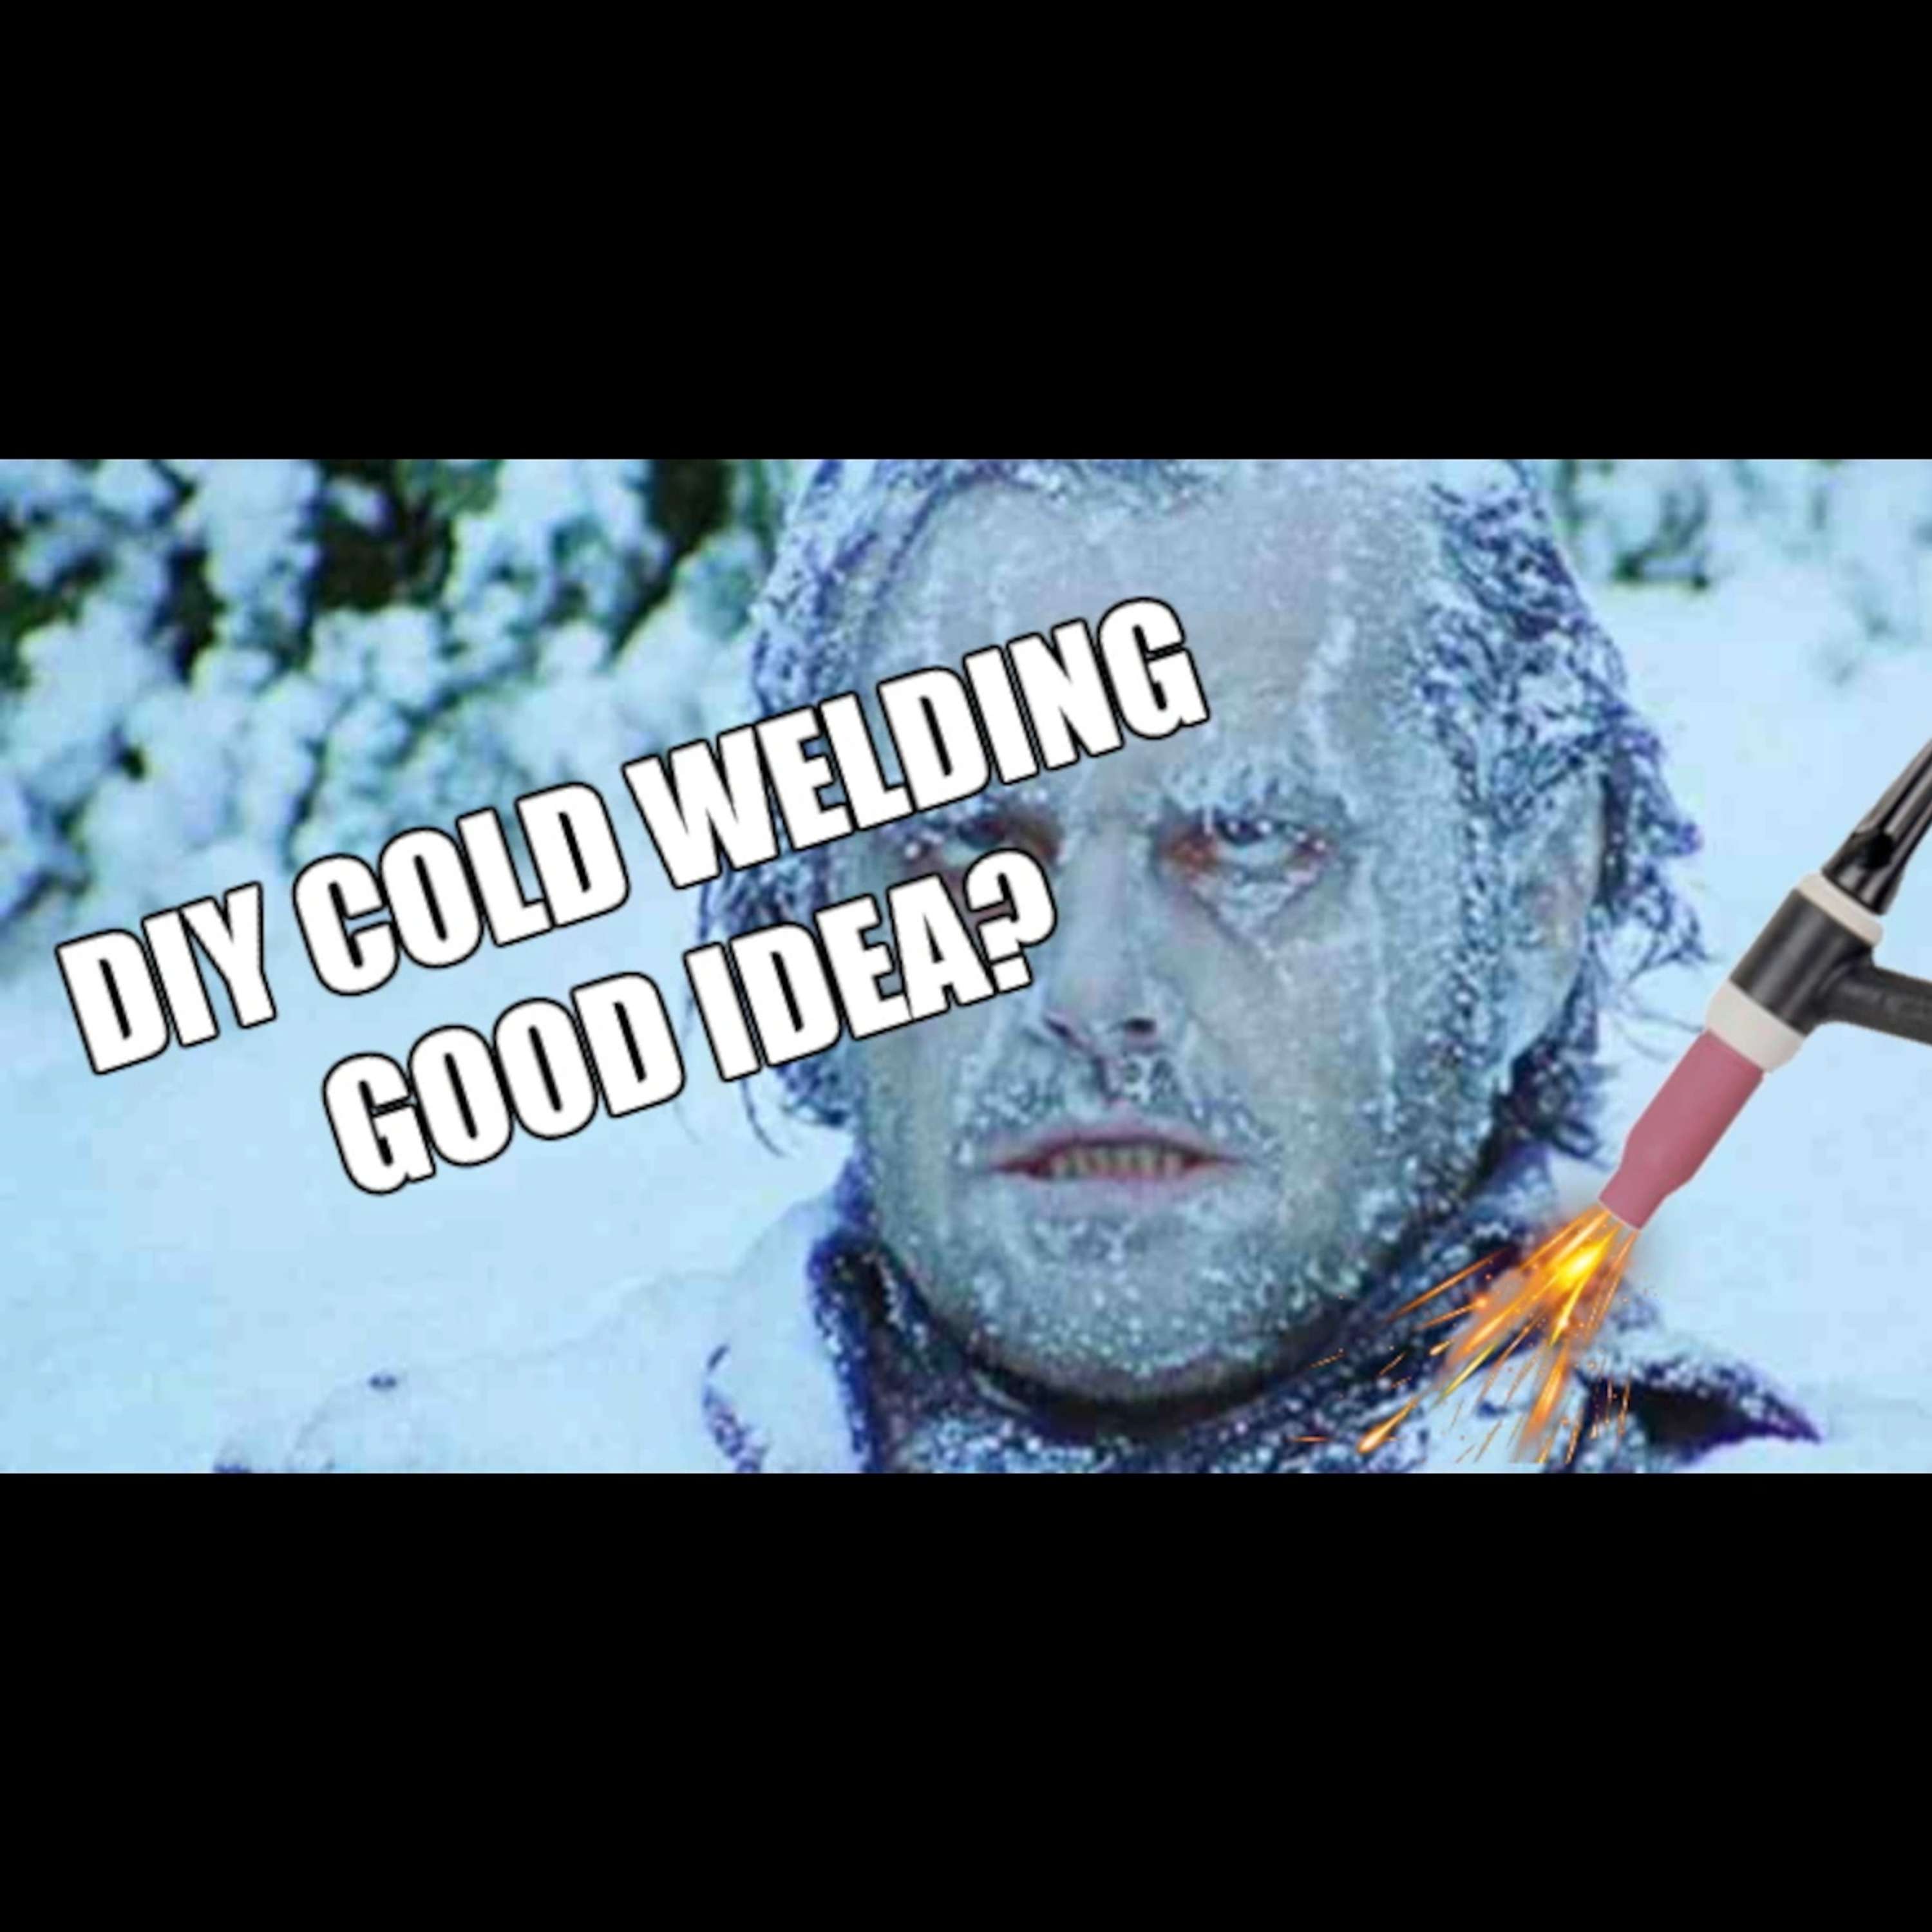 EP#361: Cold Welding This Podcast Together